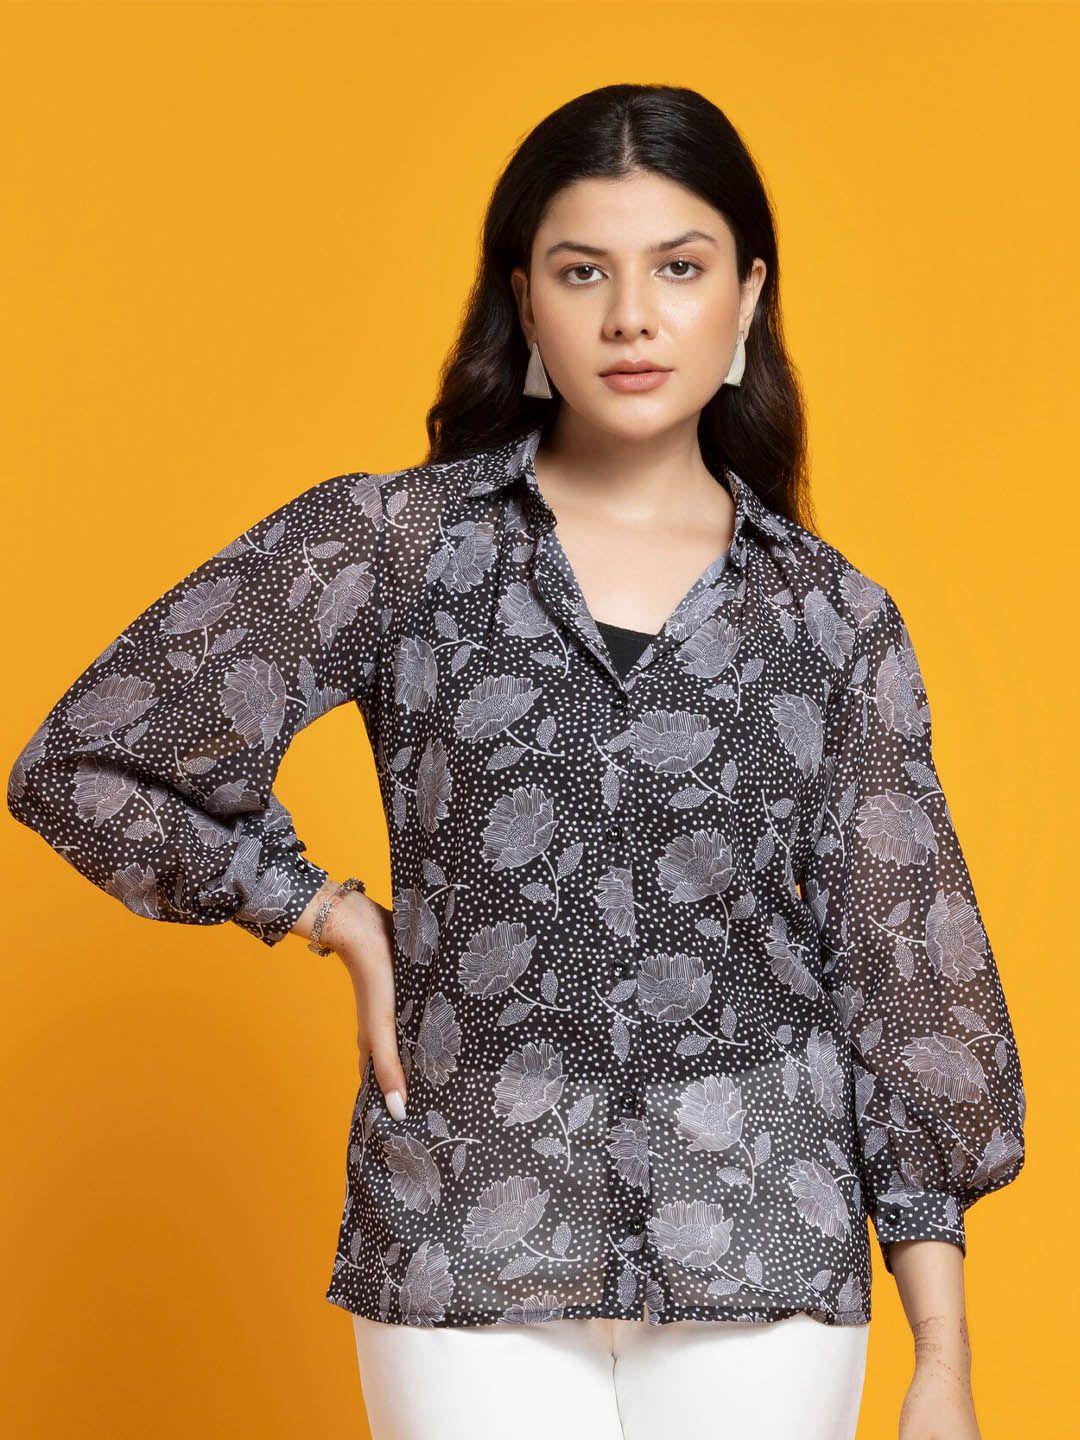 sew you soon black floral print cotton georgette shirt style top